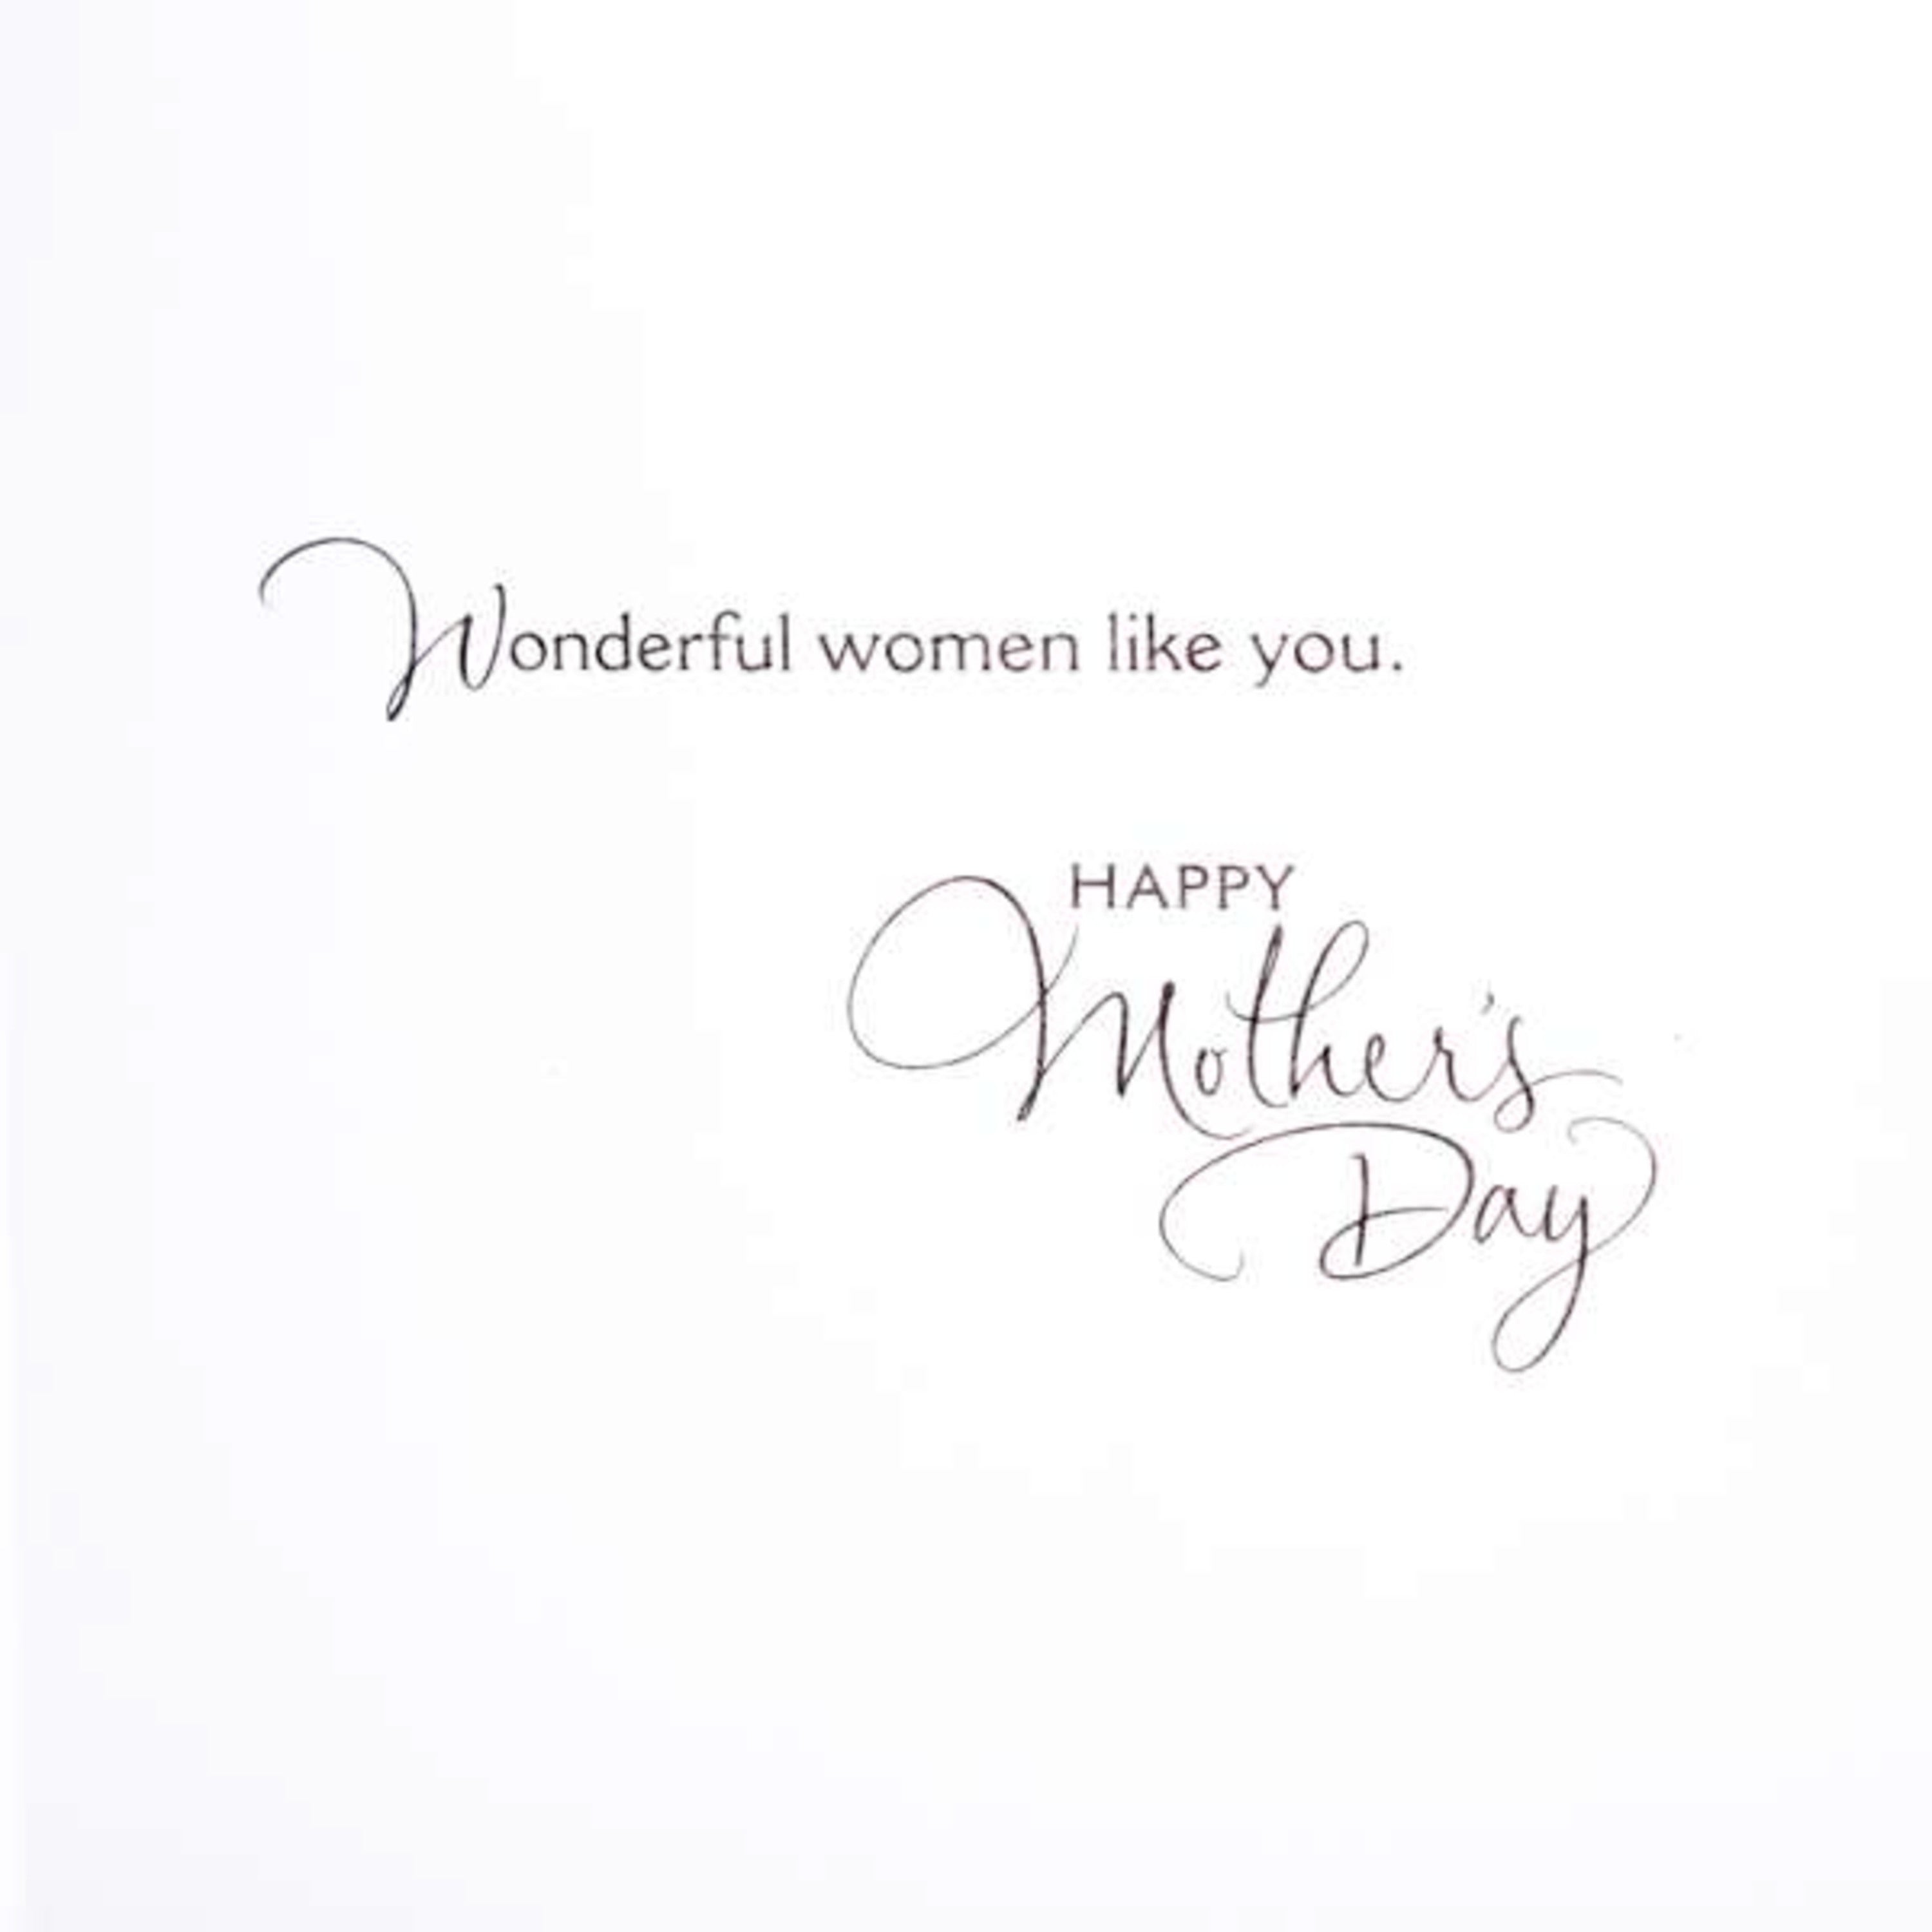 Mother's Day Card for Aunt (Wonderful Woman)